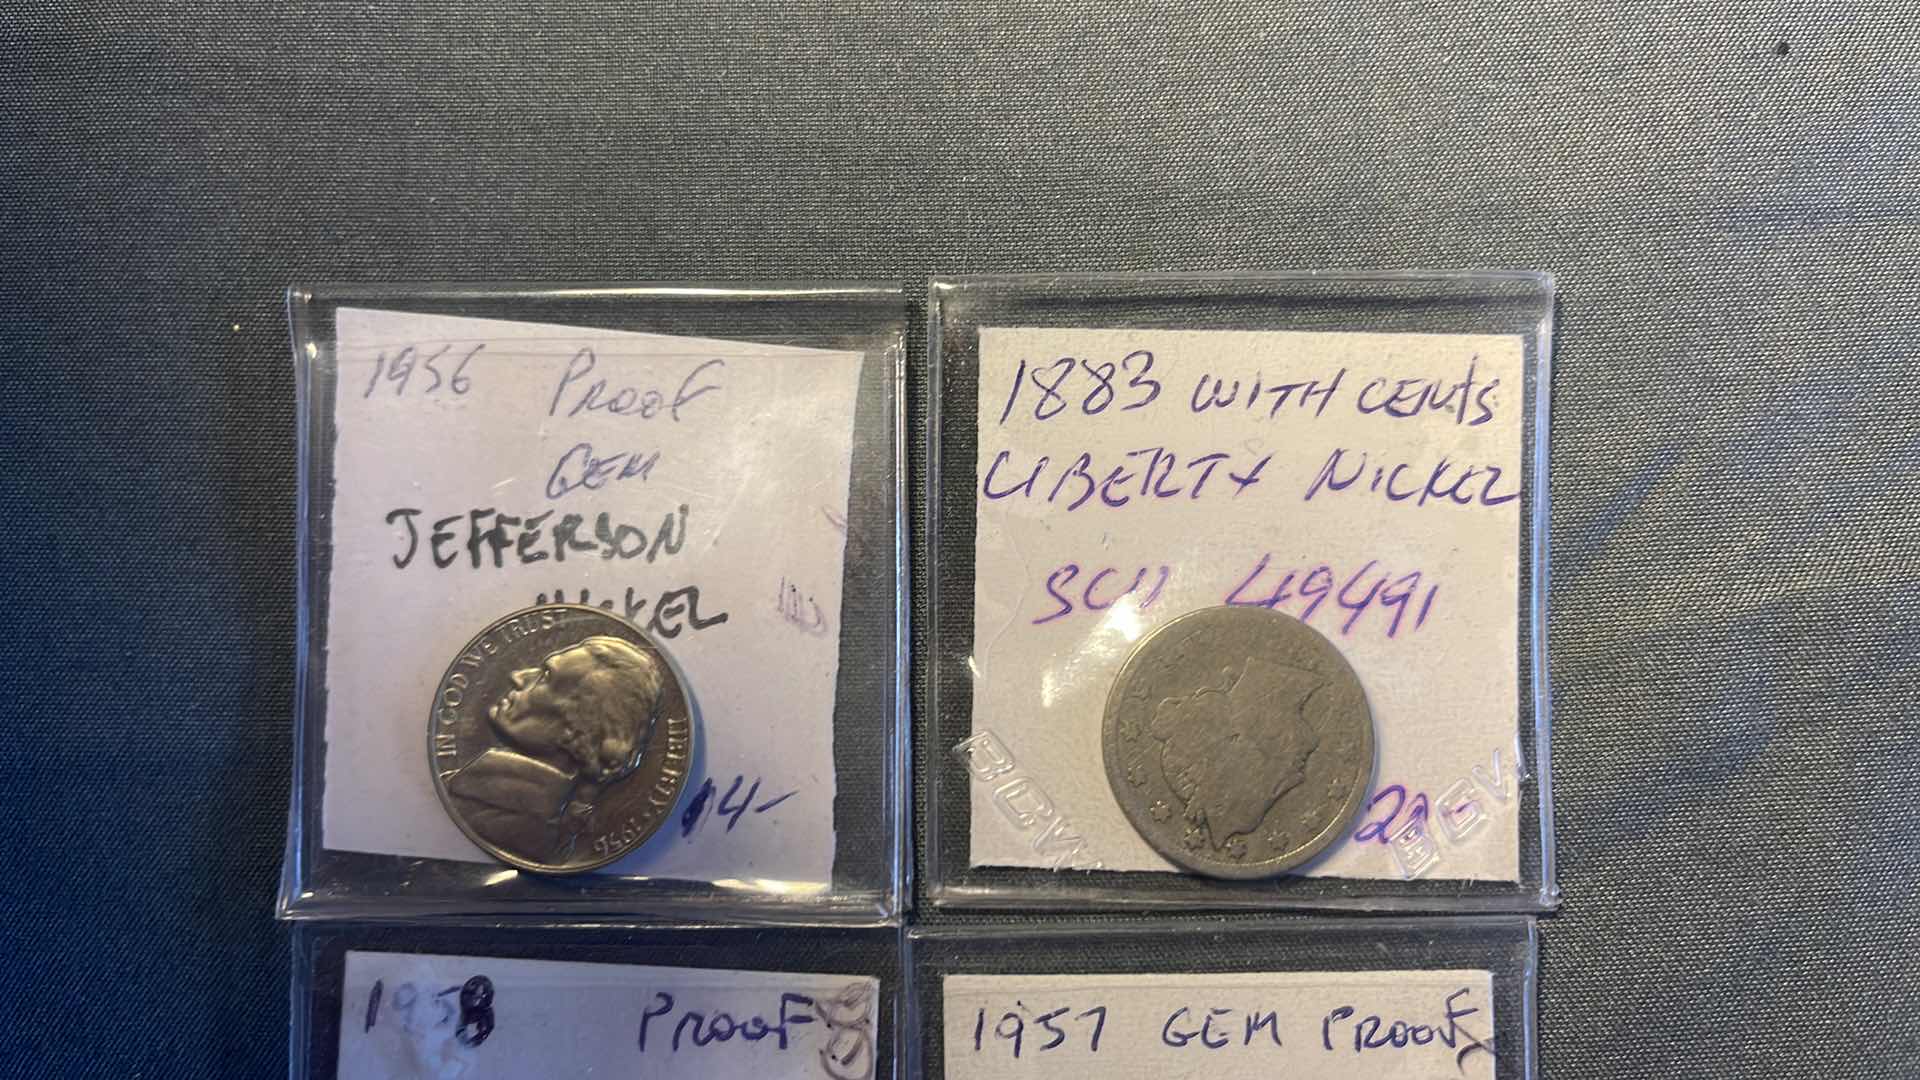 Photo 2 of 4 RARE UNITED STATES COLLECTOR COINS